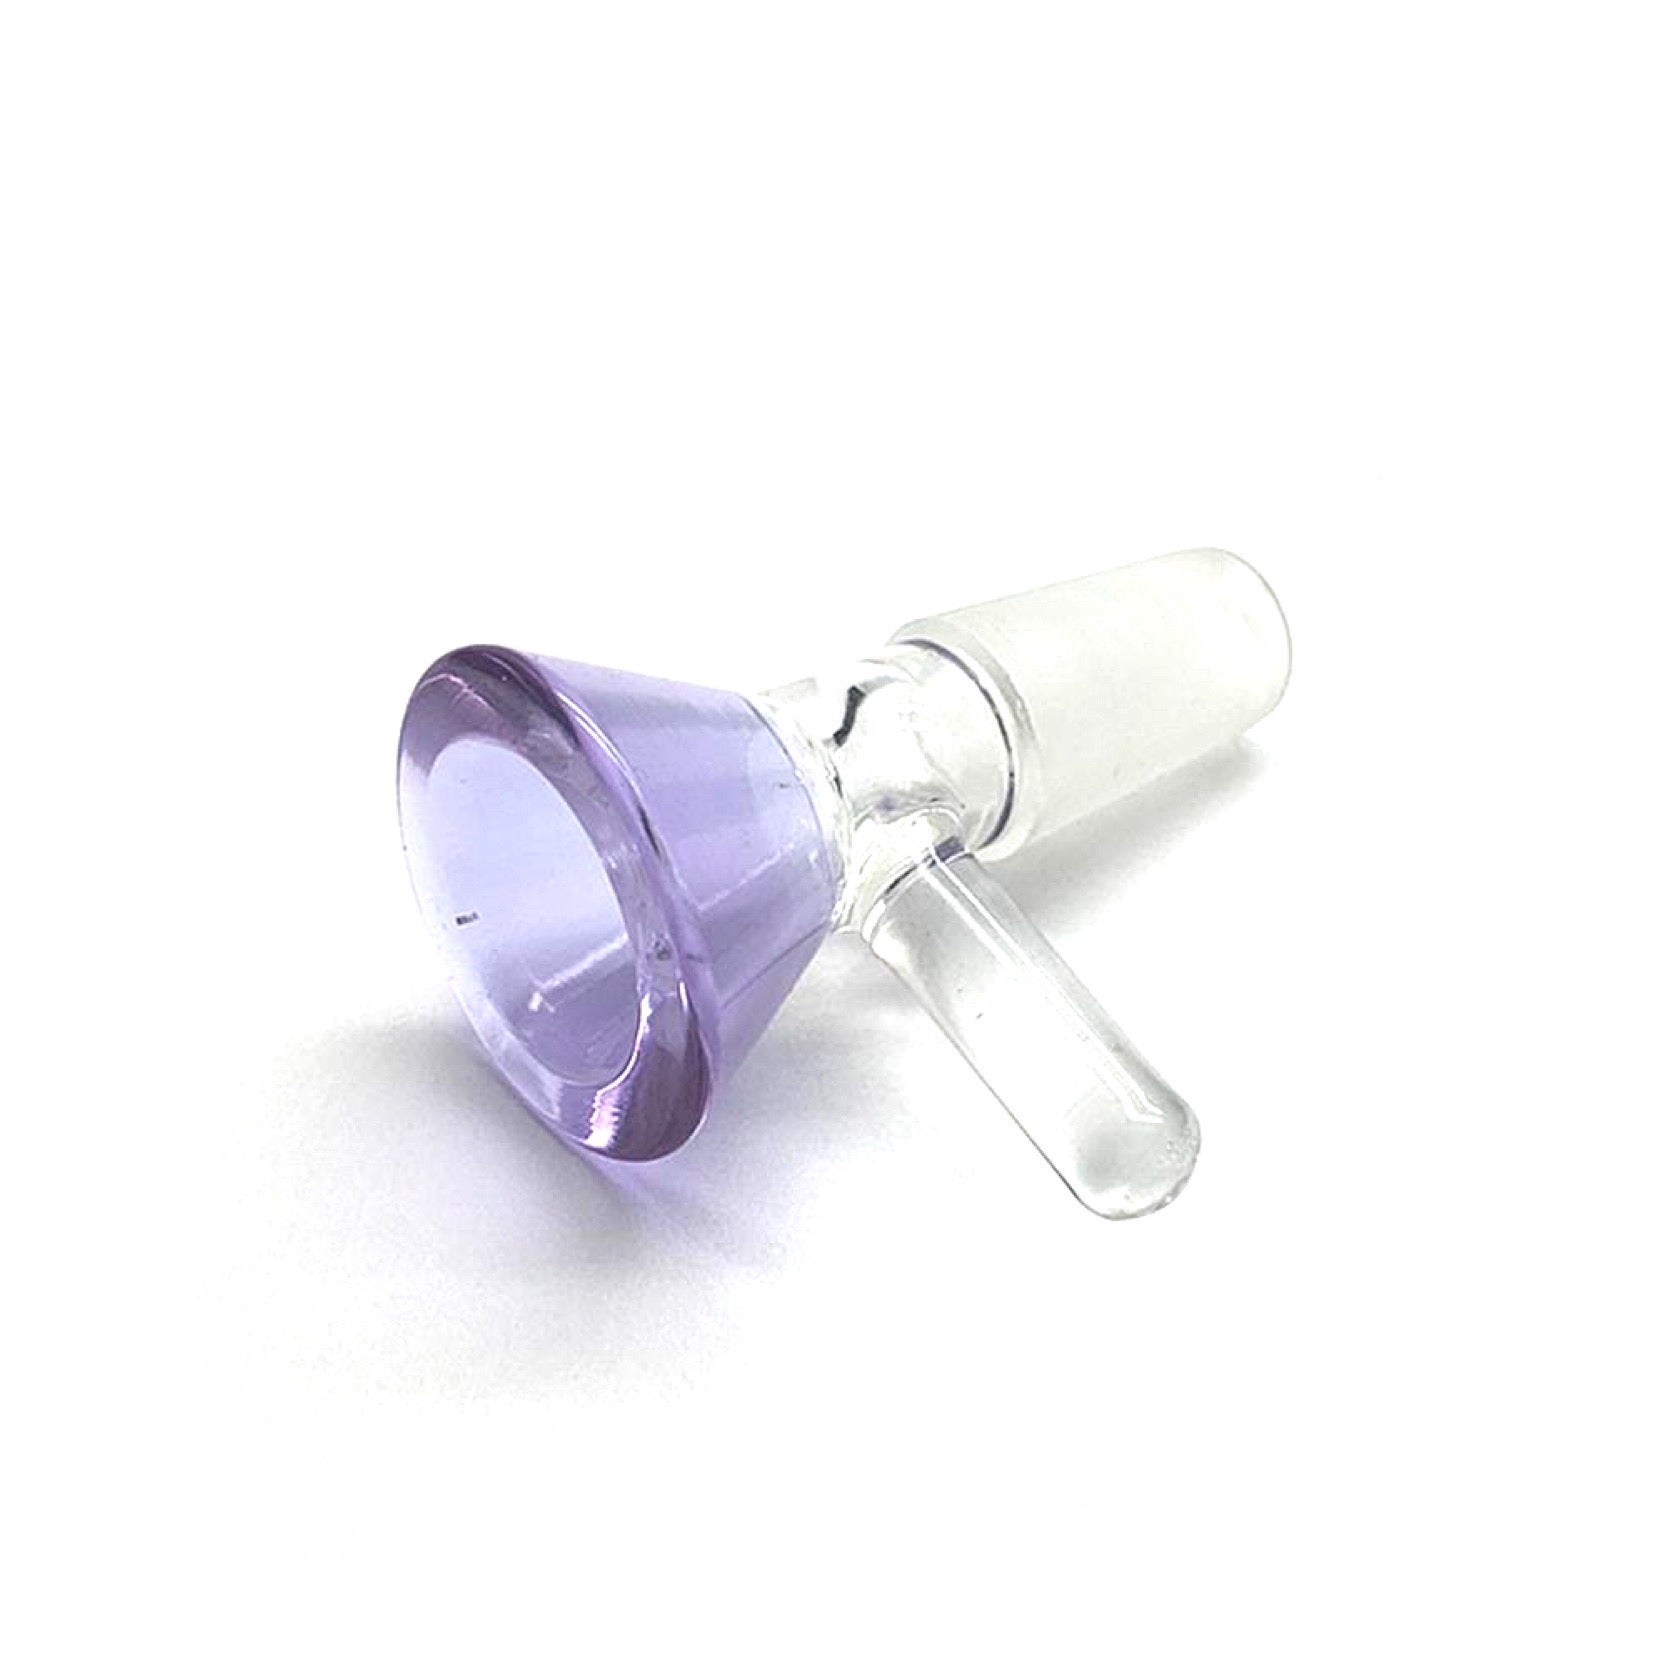 Colored Glass Water Pipe Bowl Piece - 14mm Male by Mission Dispensary | Mission Dispensary